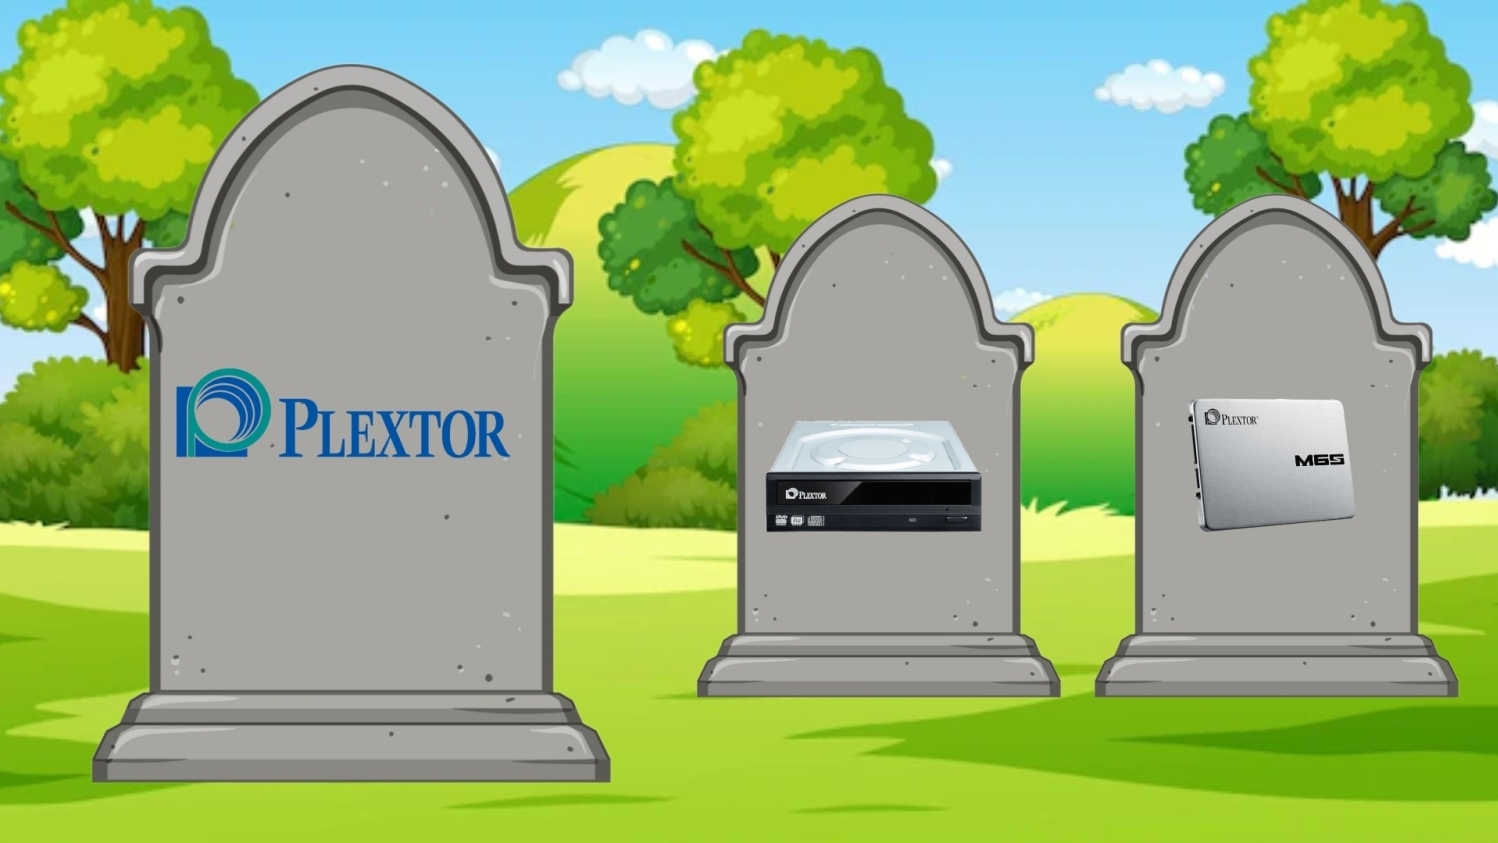 Legendary and iconic PC storage brand Plextor is no more, with 